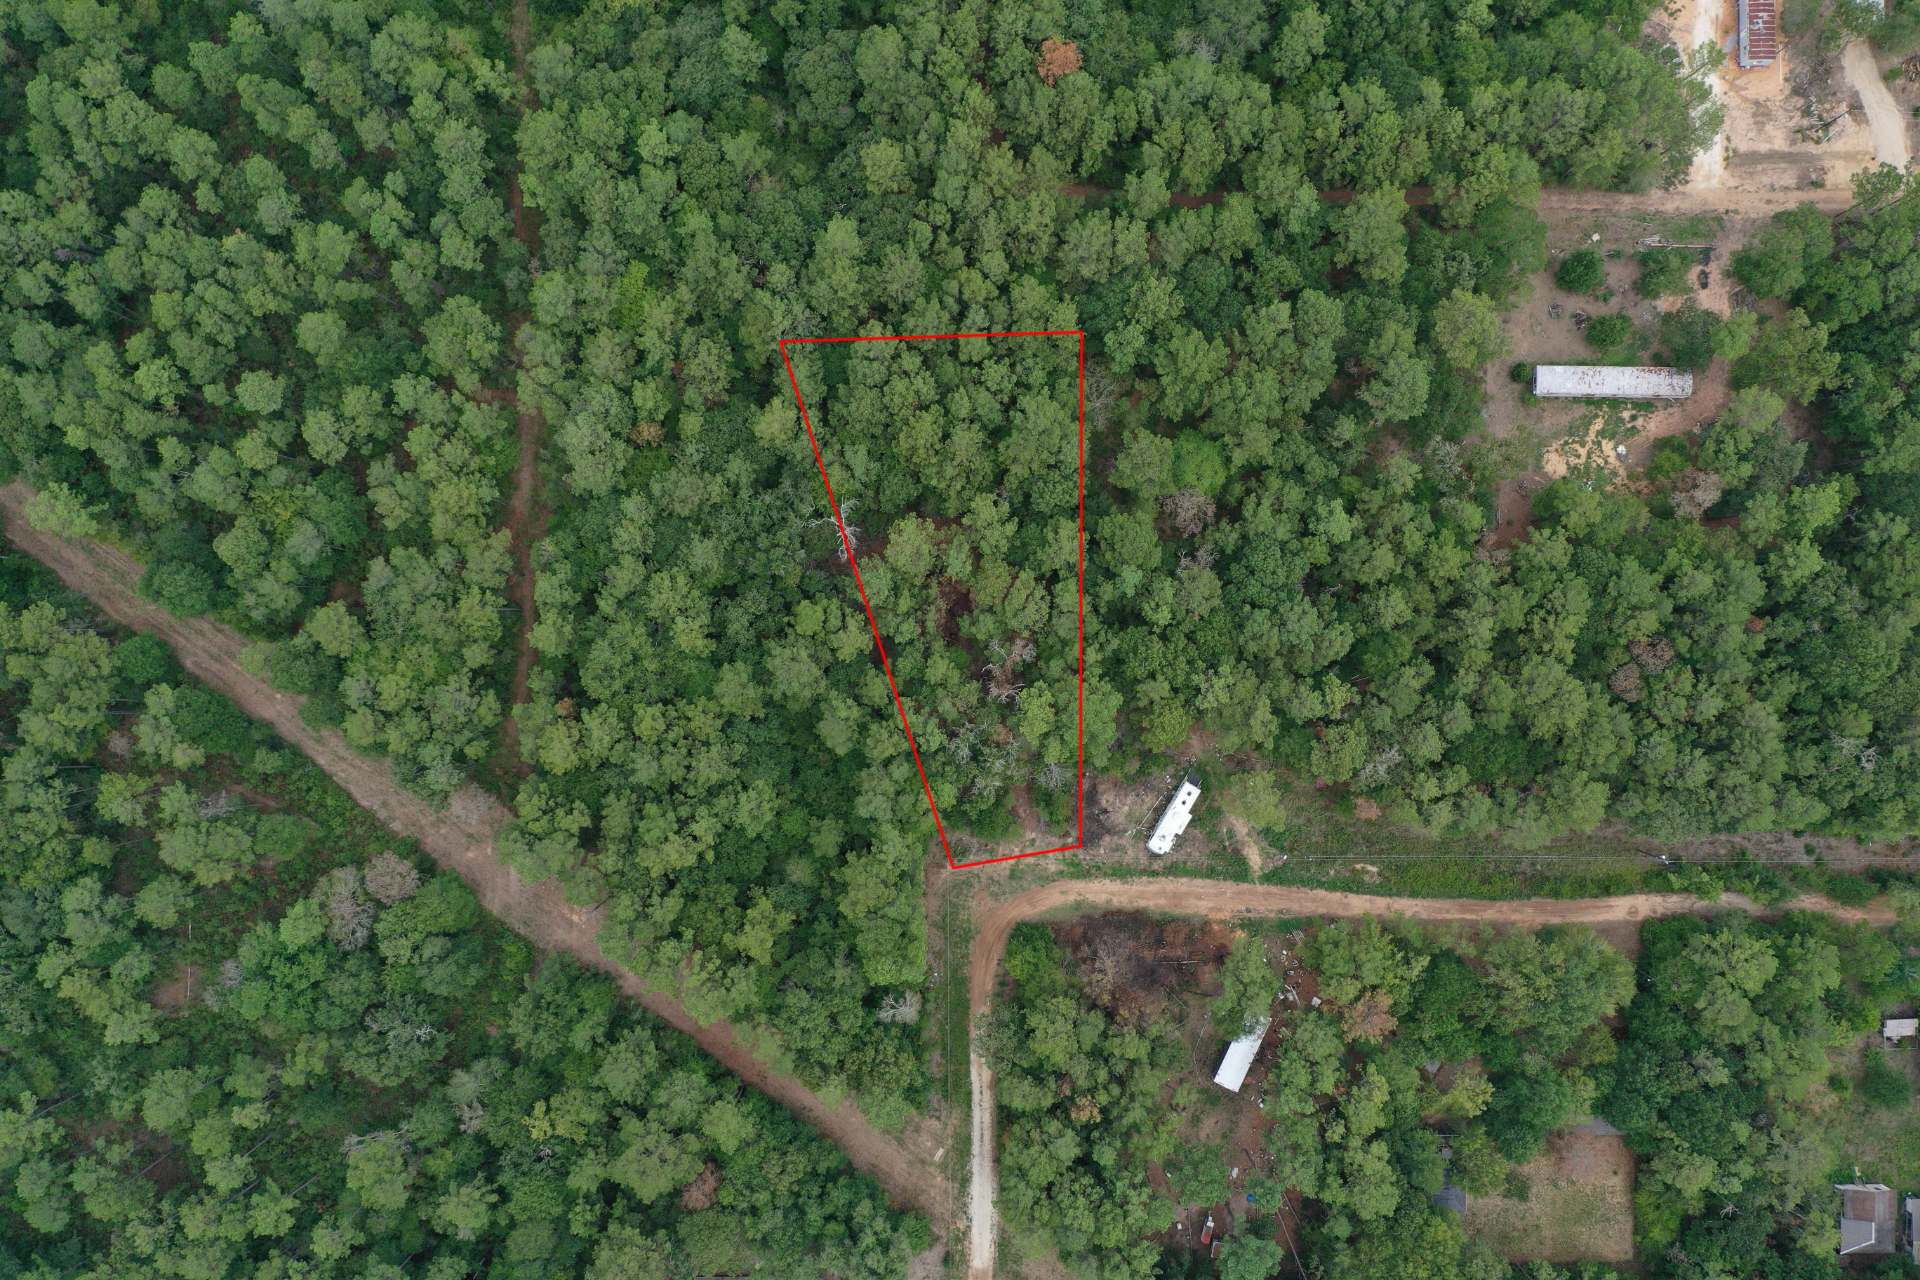 ⭐SOLD⭐0.17 Acres Mobiles Allowed Near Aggie Expy | $15,000